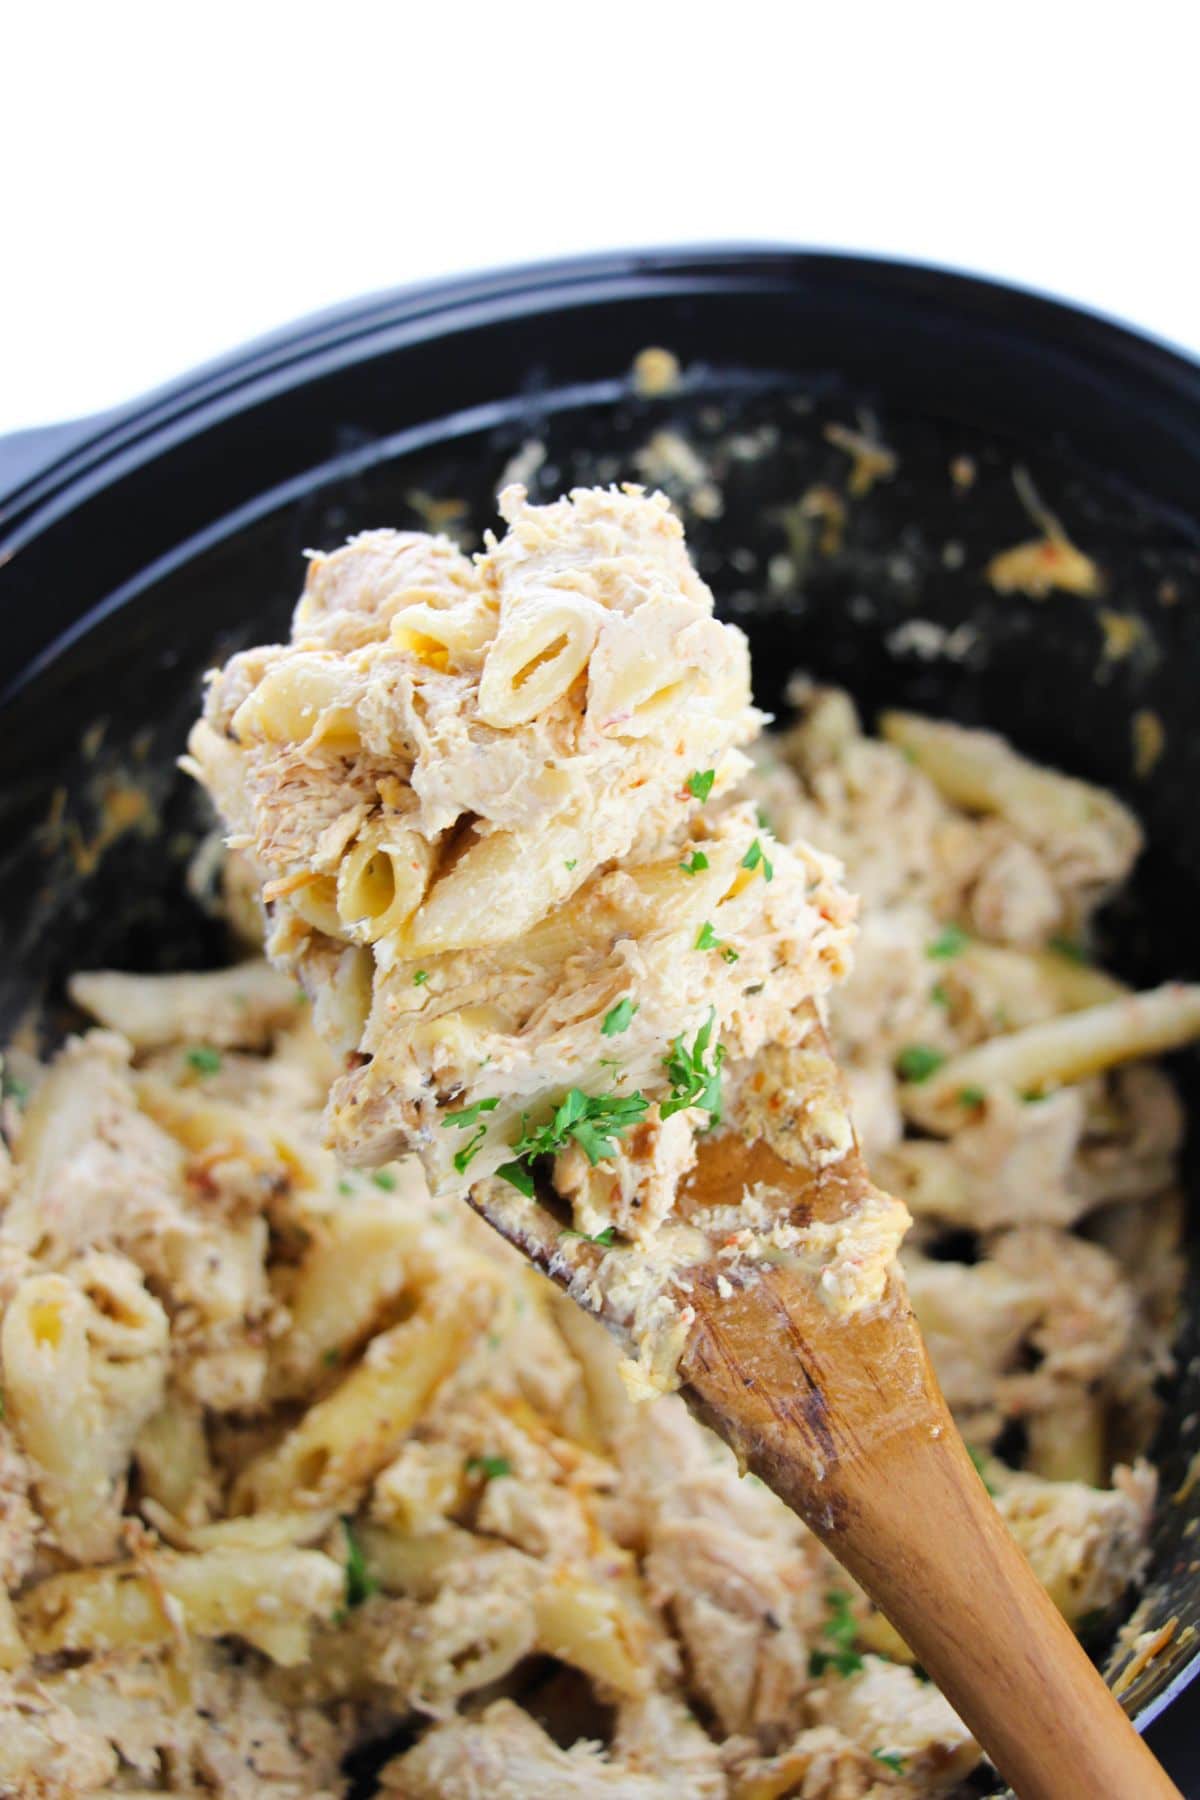 A portion of Olive Garden Crock Pot Chicken on a wooden spoon with more food in a crock pot under it.